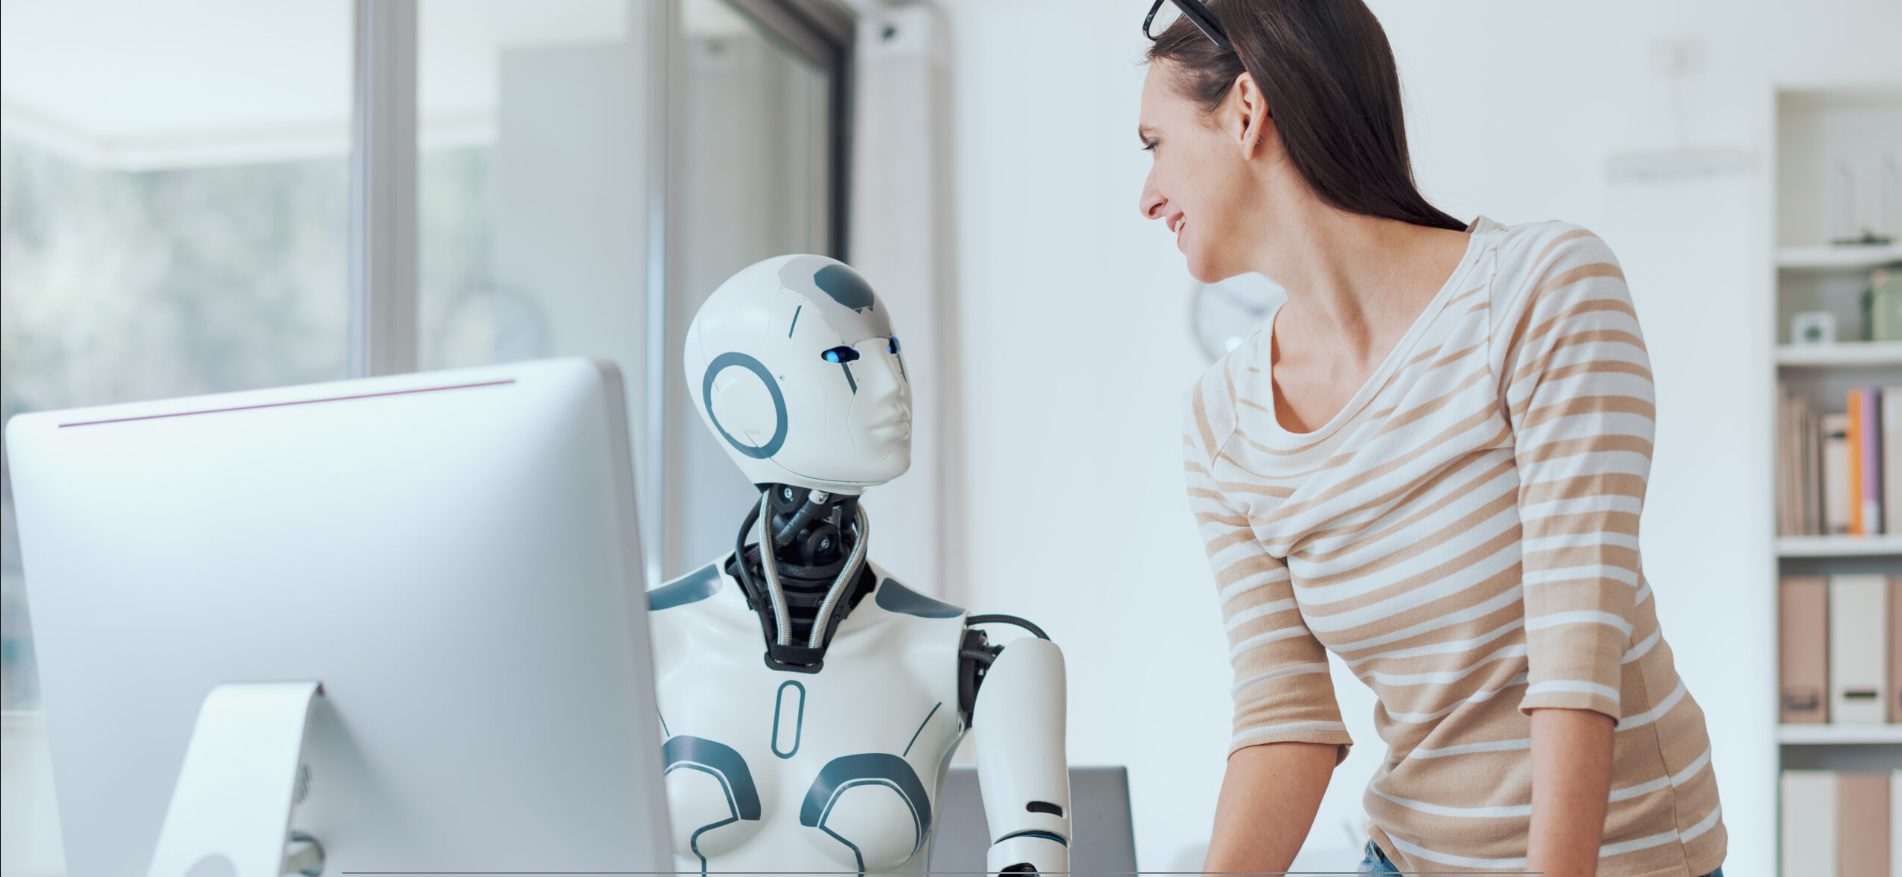 Woman and AI Robot Working Together